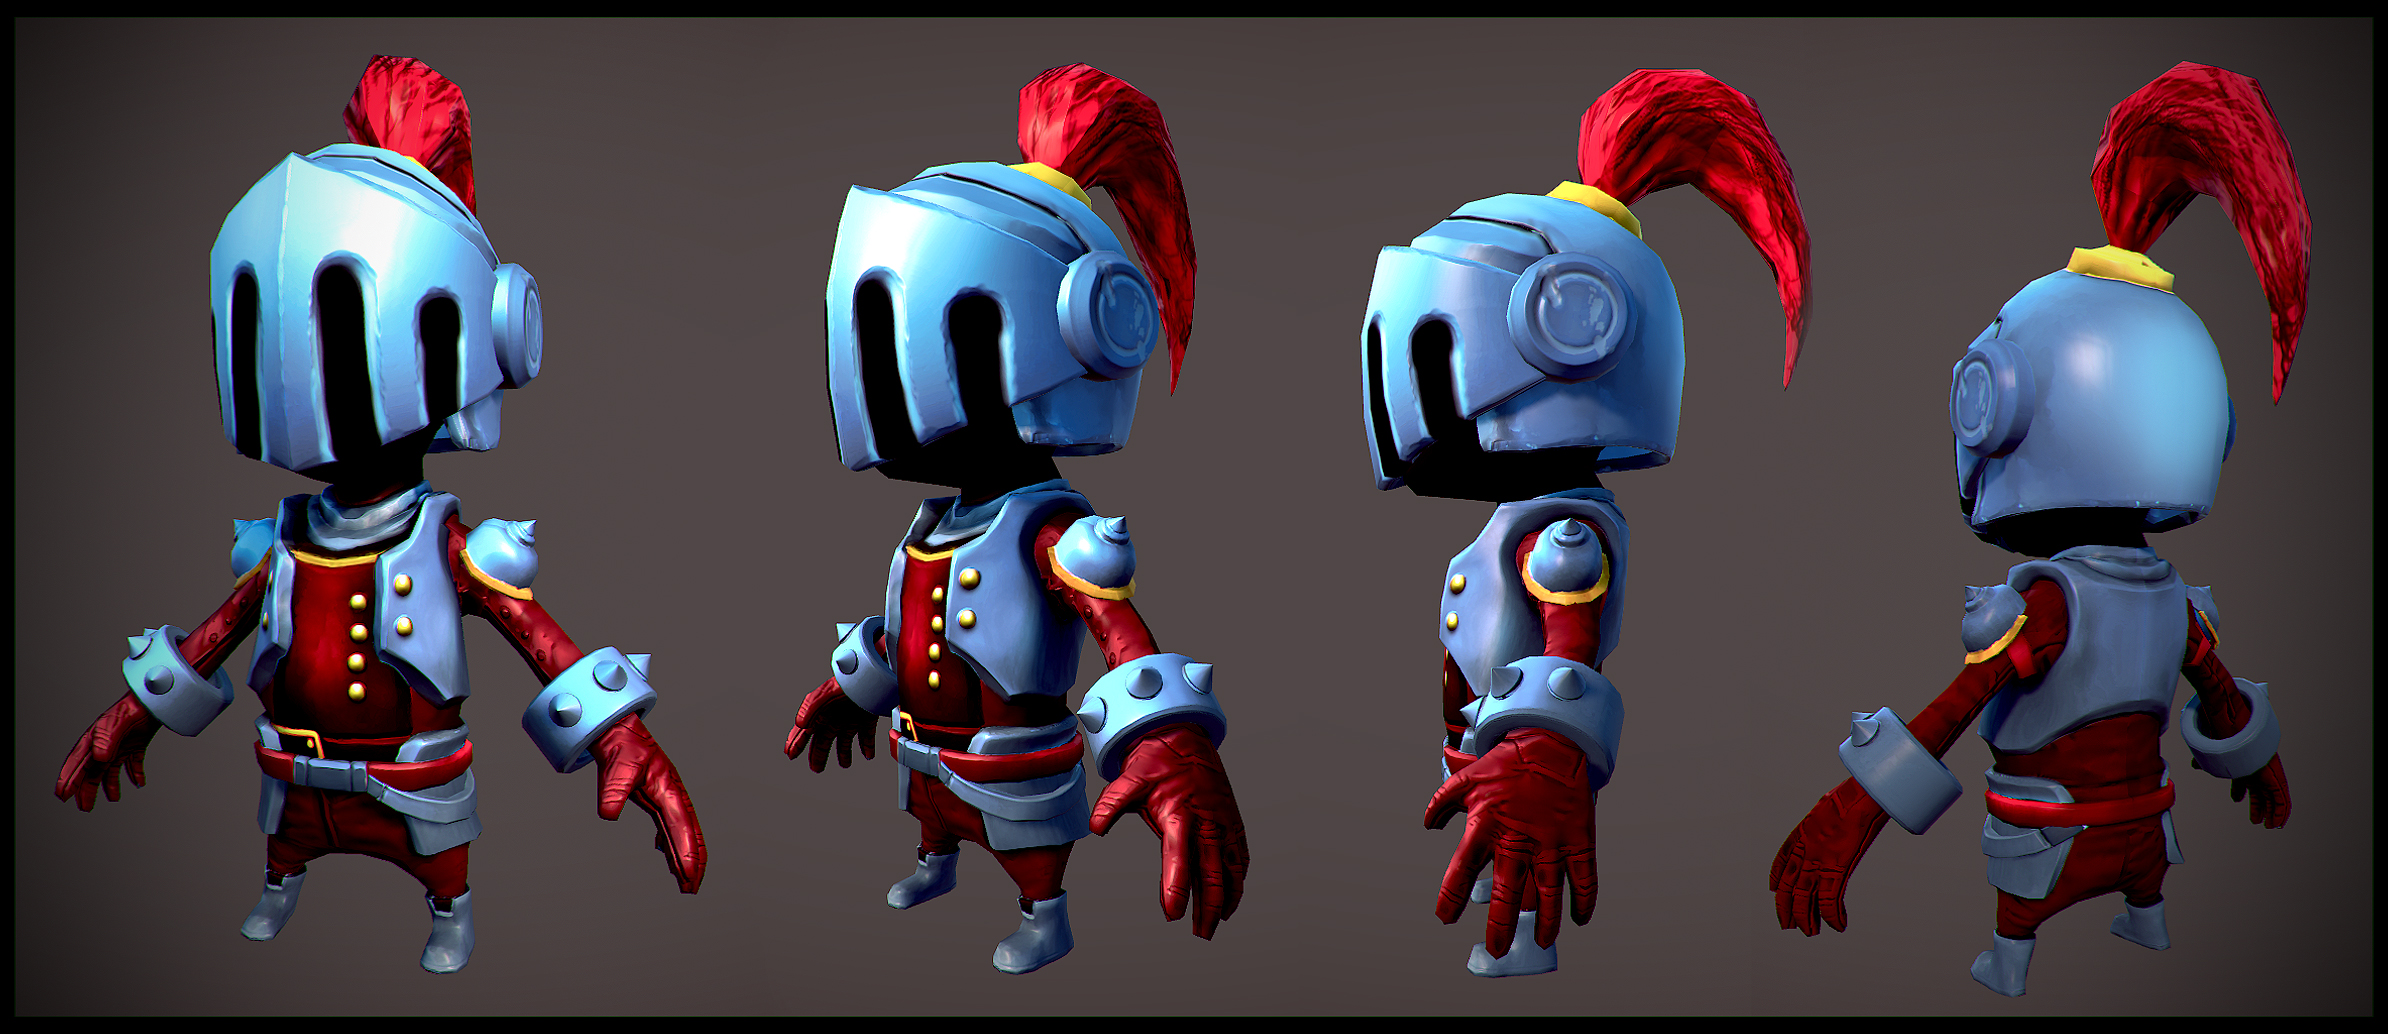 small_knight_low_poly_by_spybg-d5vpmc7.jpg